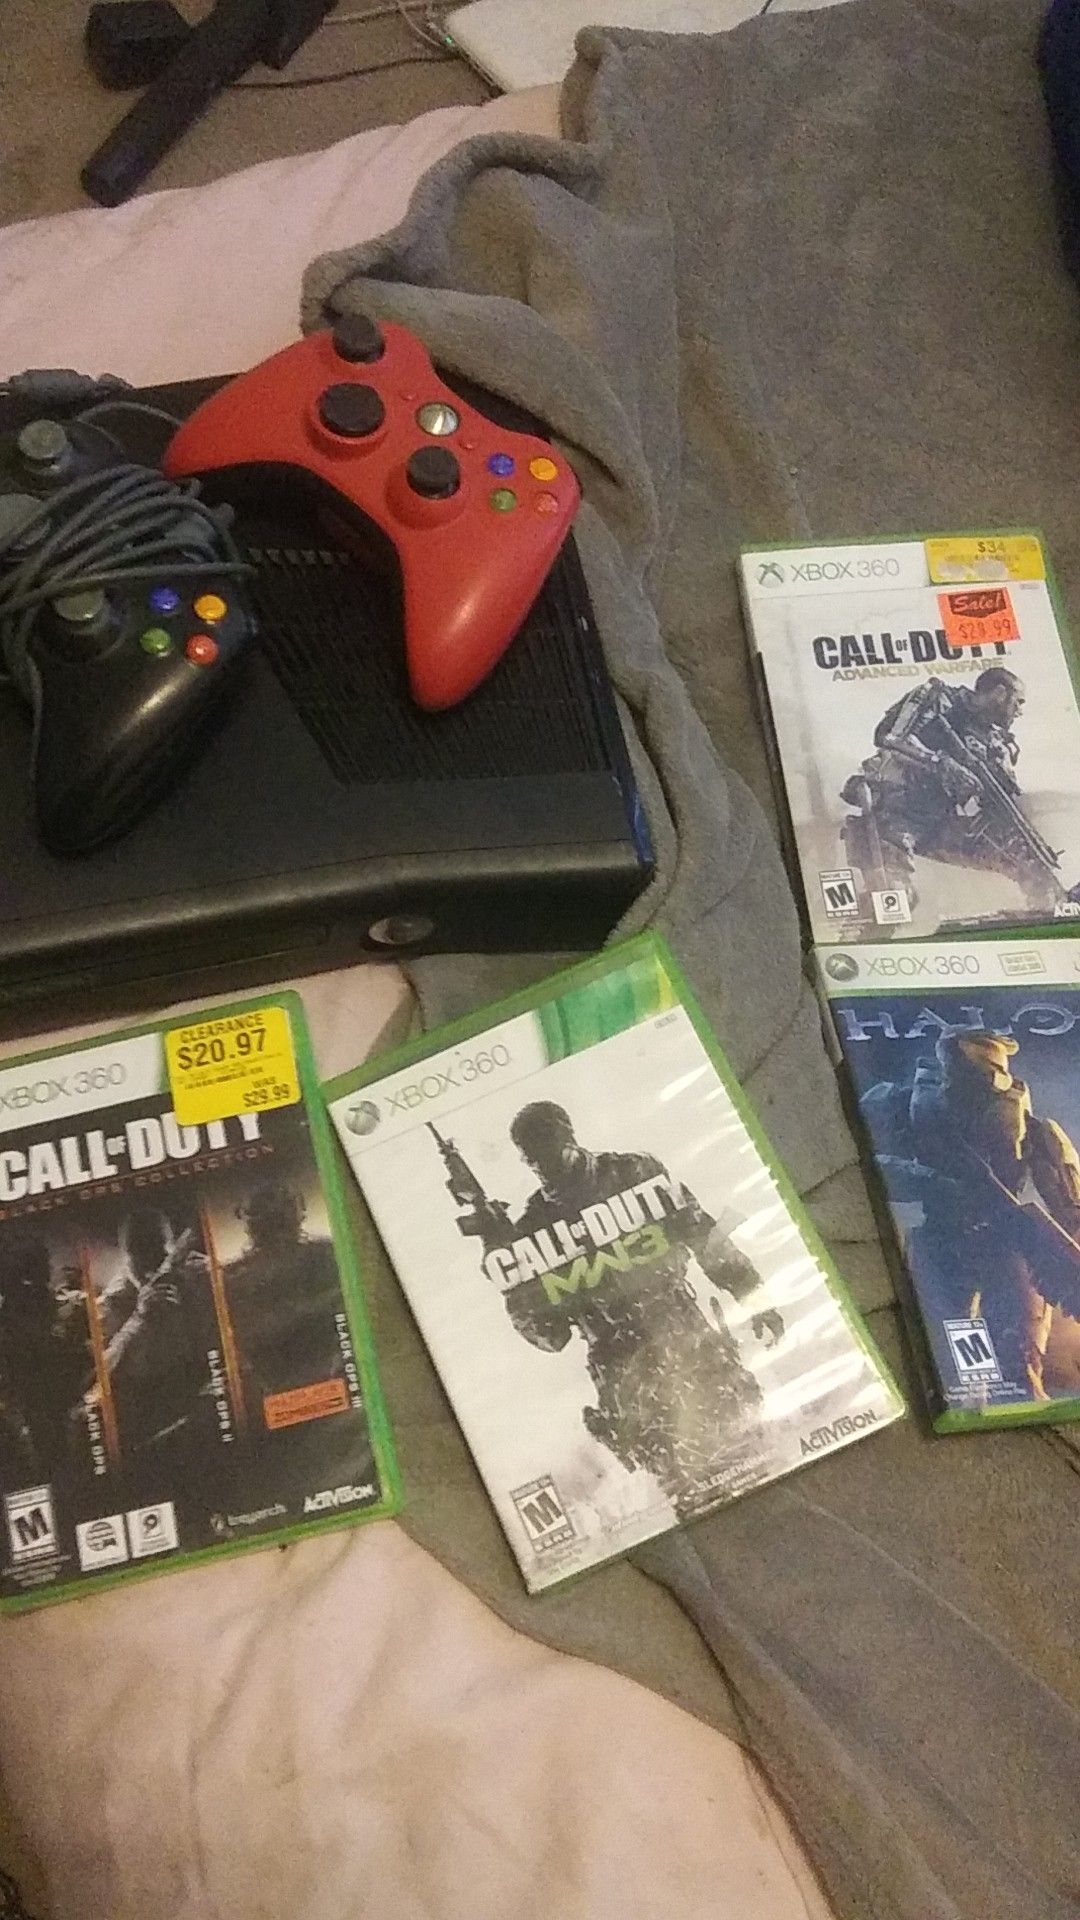 Xbox 360 slim with games